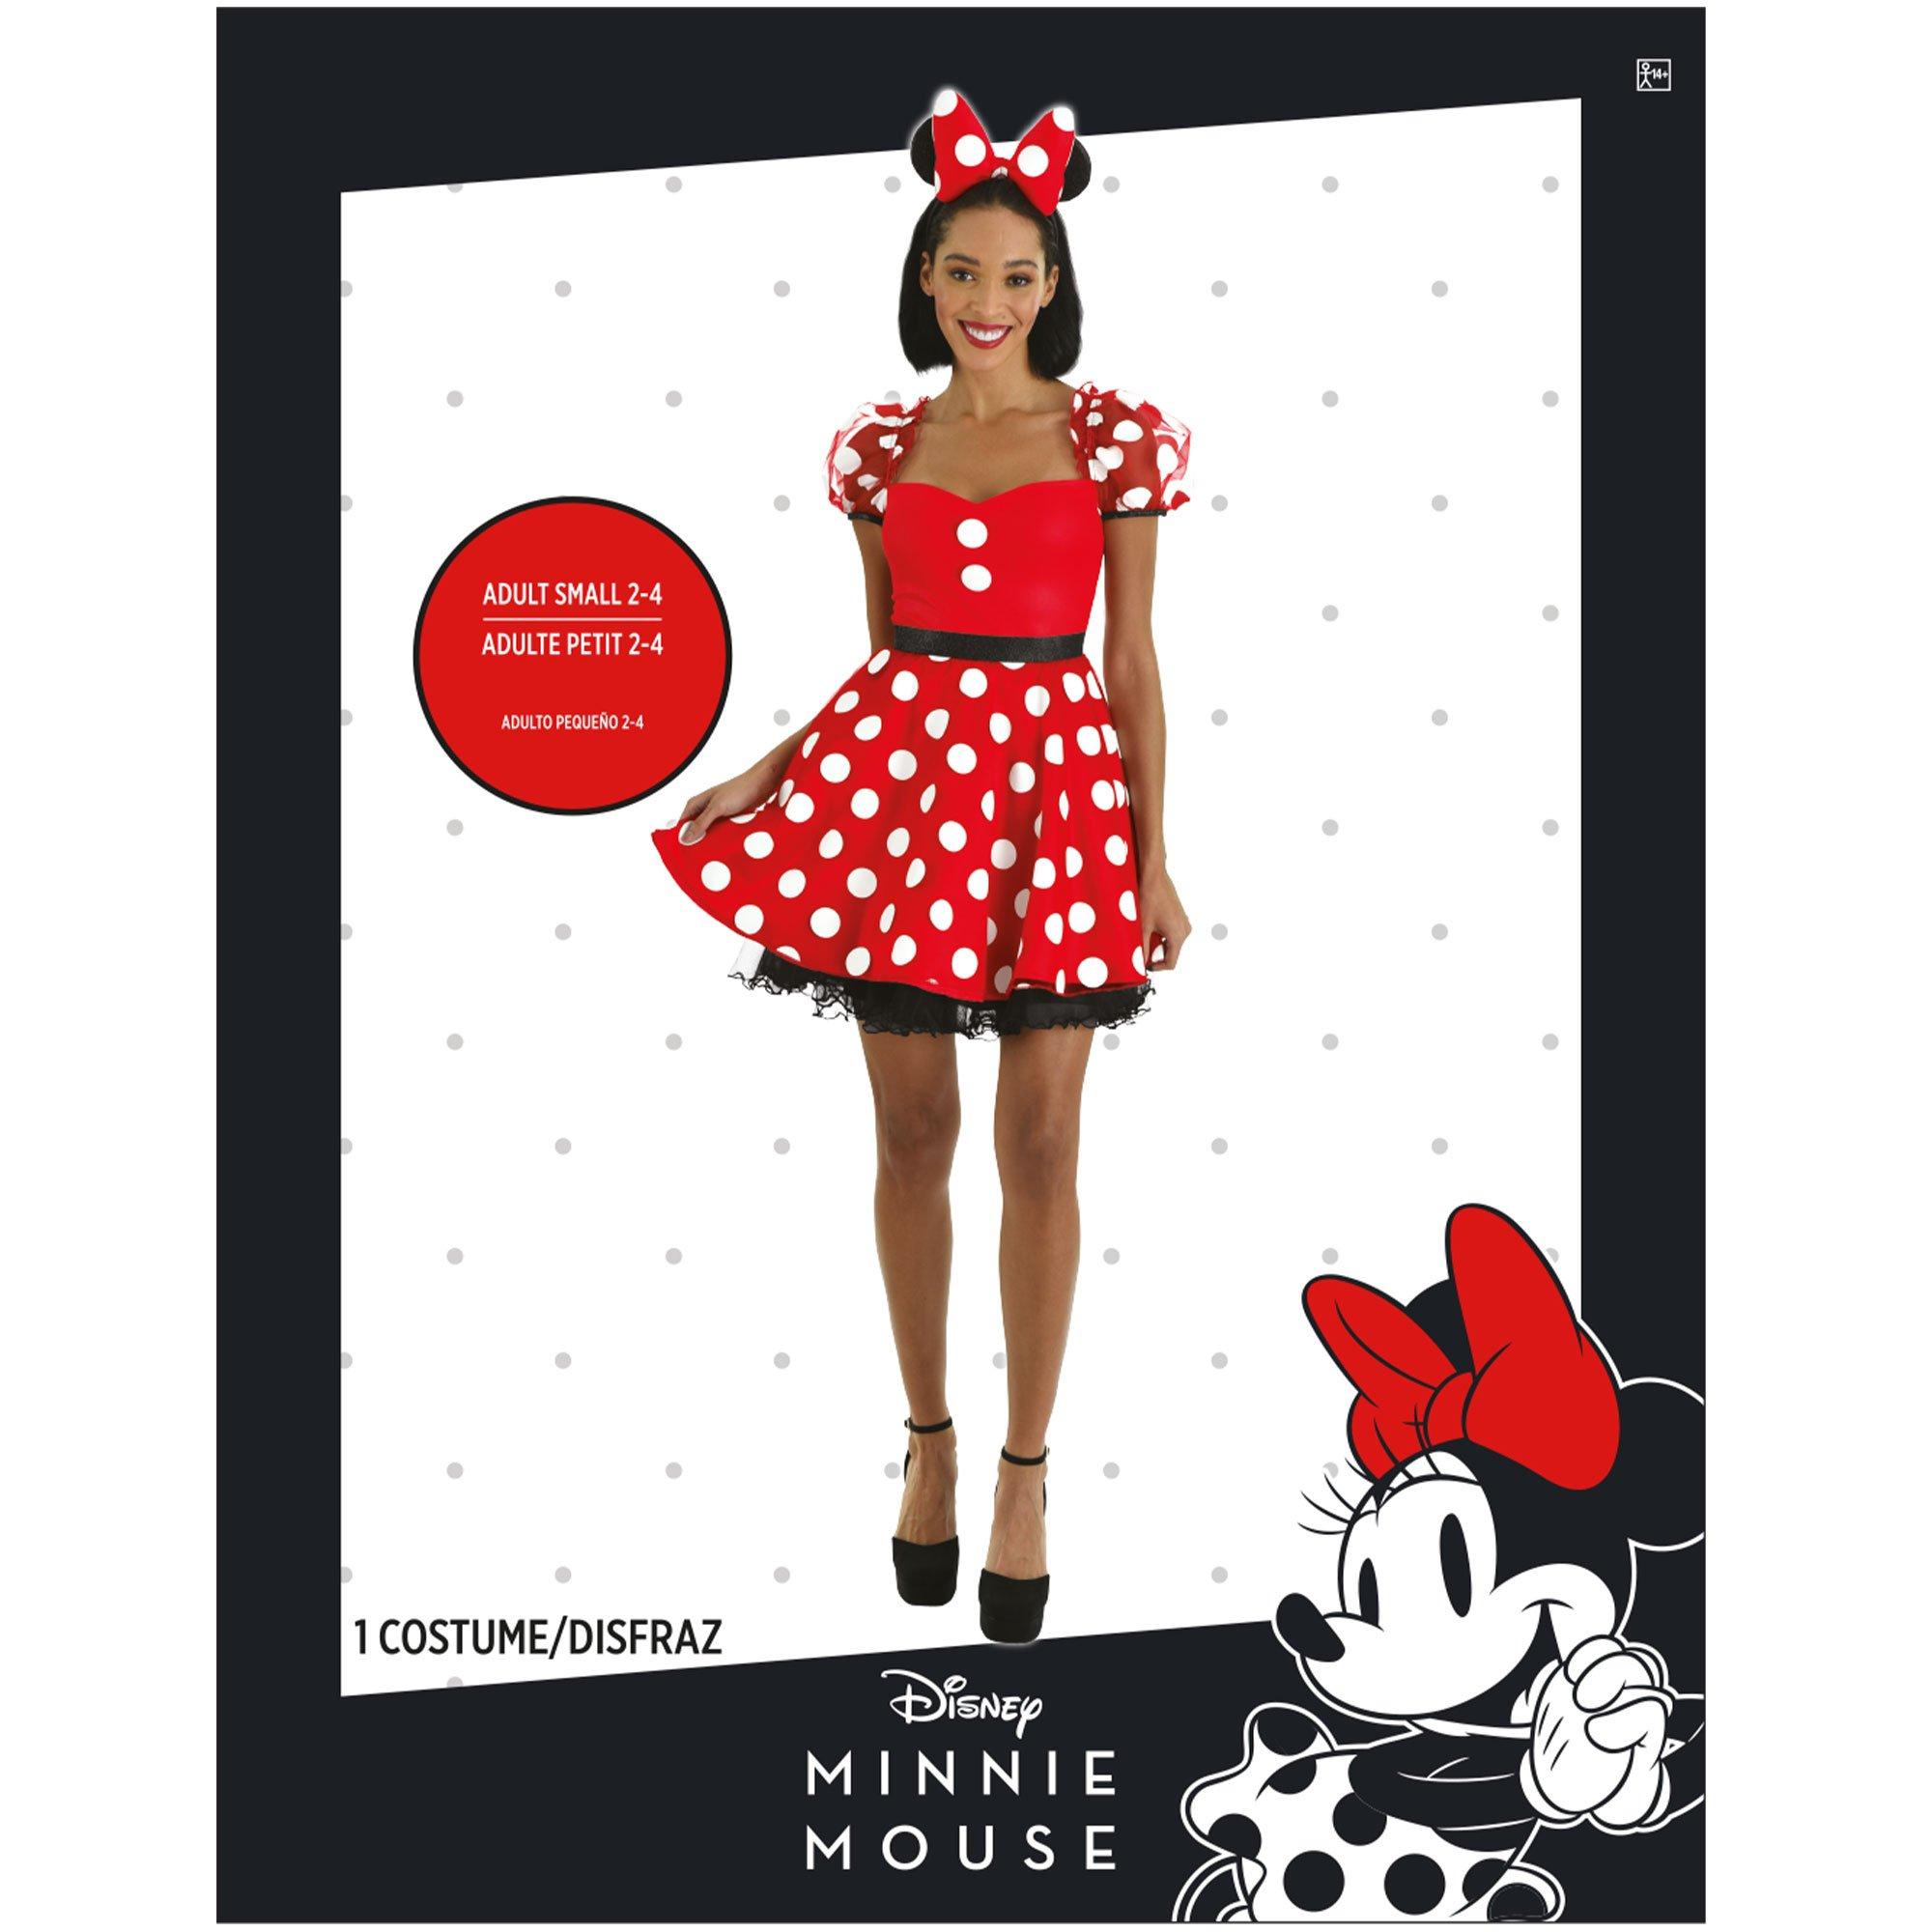  Disney Deluxe Minnie Mouse Costume for Girls, Minnie Halloween  Dress, Red Polka Dot Dress Up Outfit Large : Clothing, Shoes & Jewelry